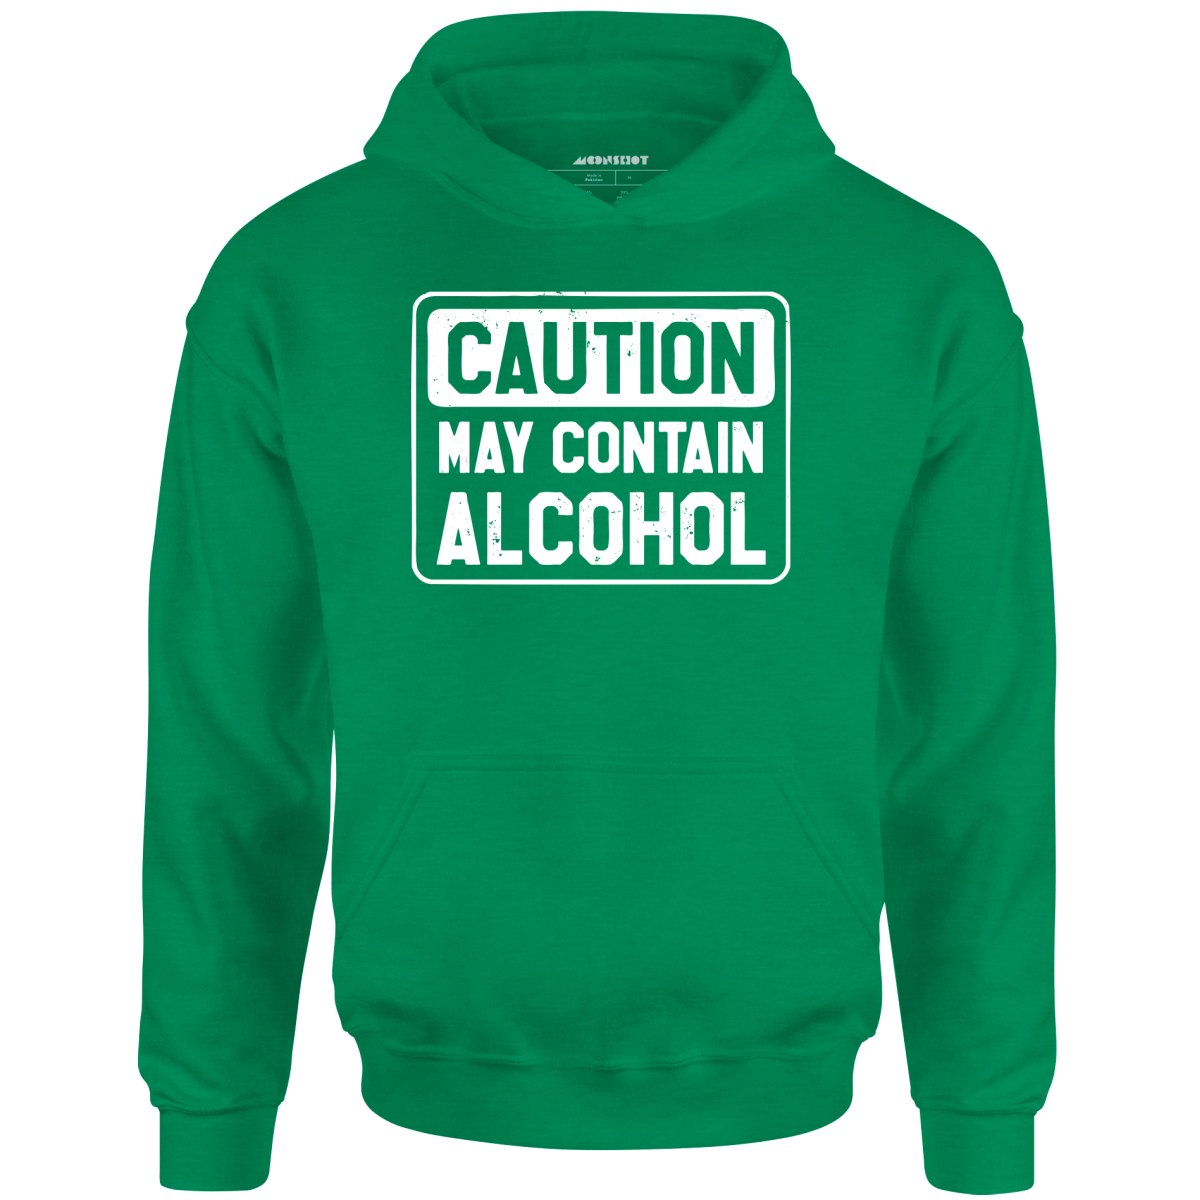 Caution May Contain Alcohol - Unisex Hoodie